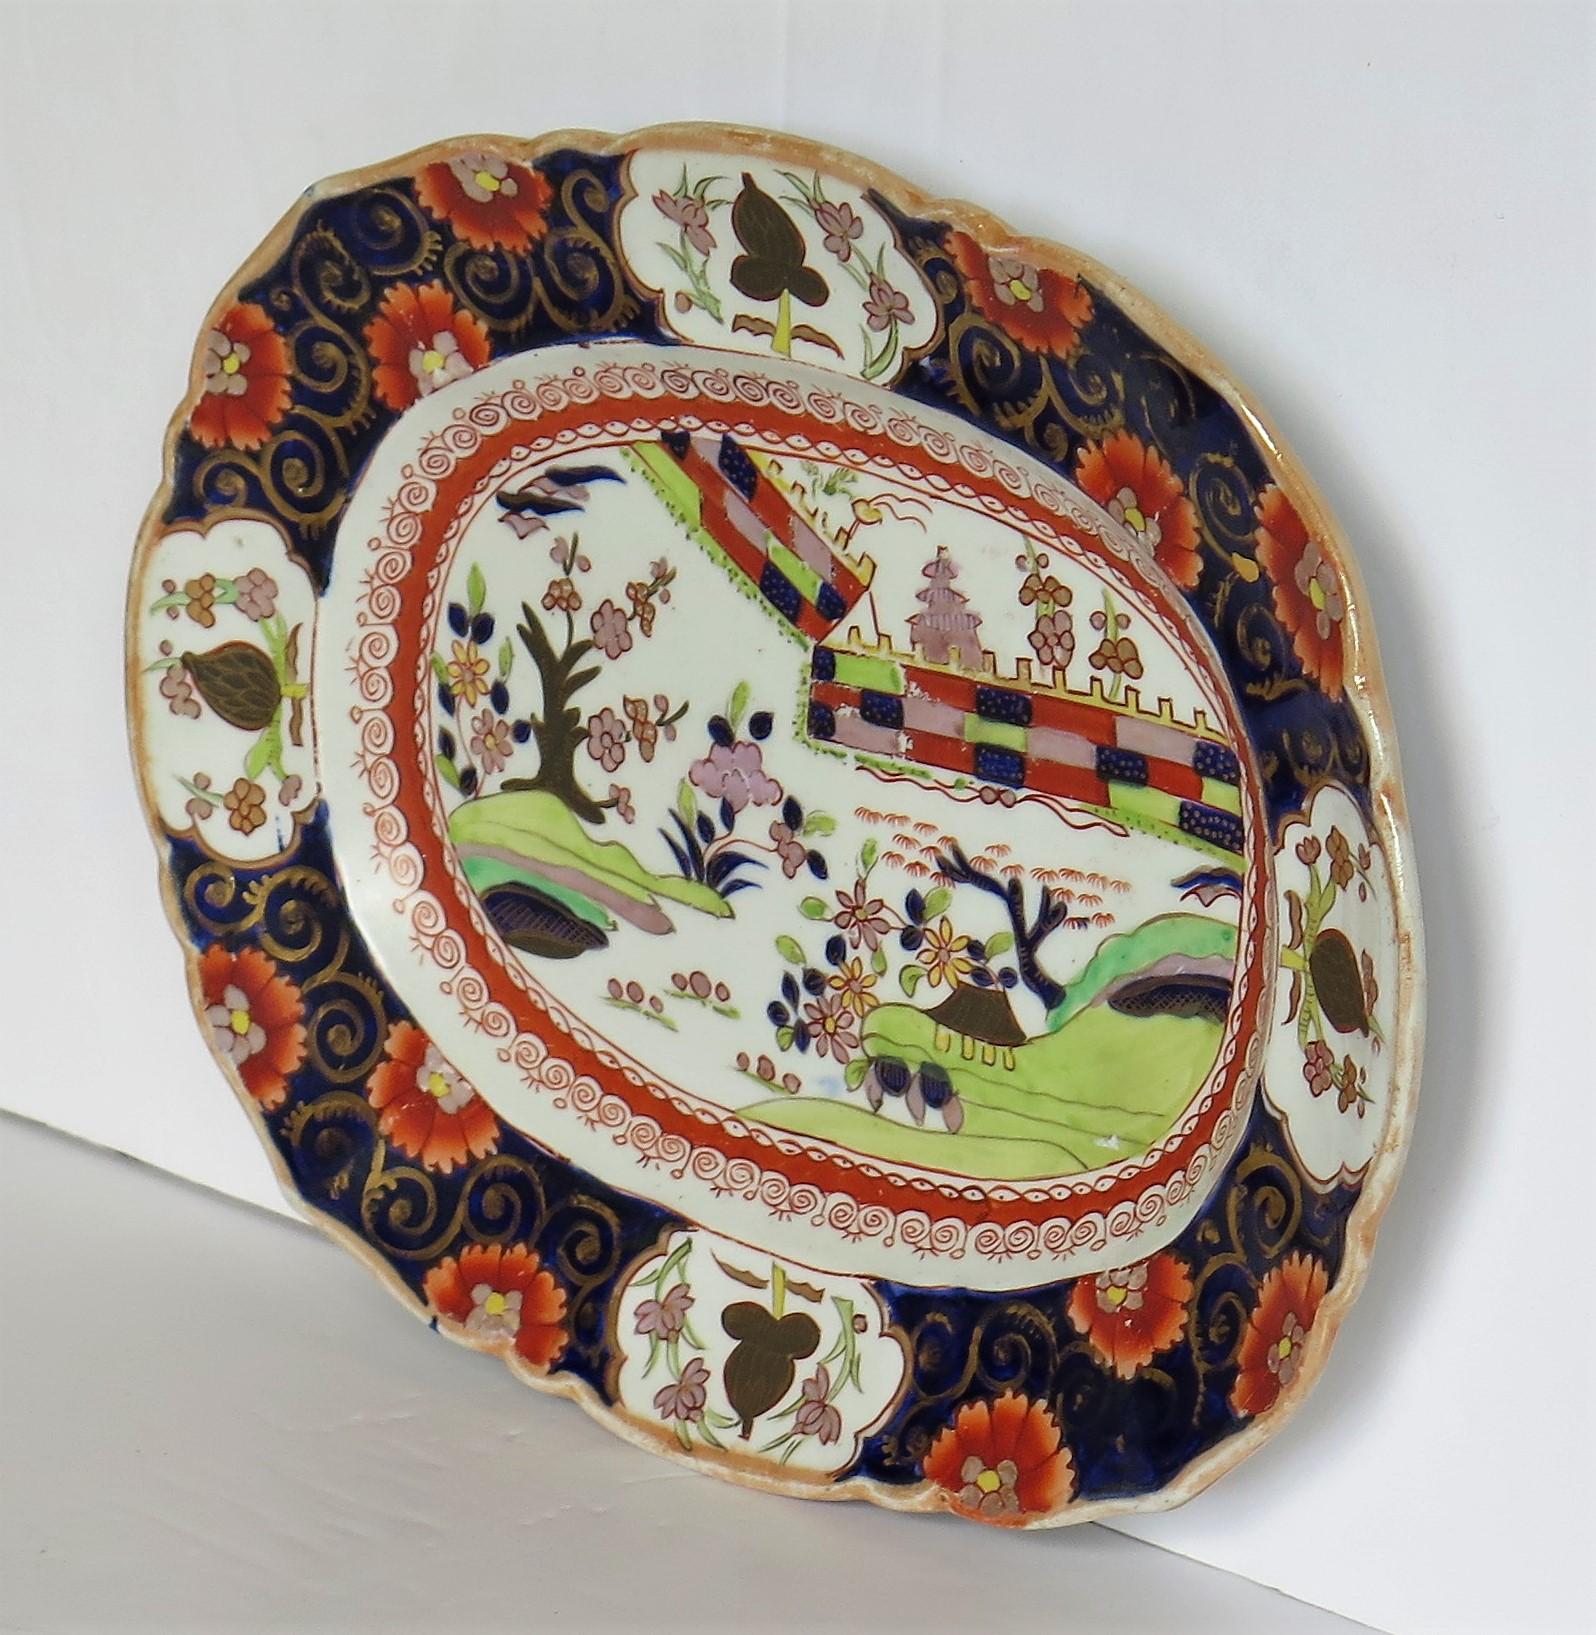 19th Century Early Mason's Ironstone Platter or Plate in Colored Wall Pattern, circa 1825